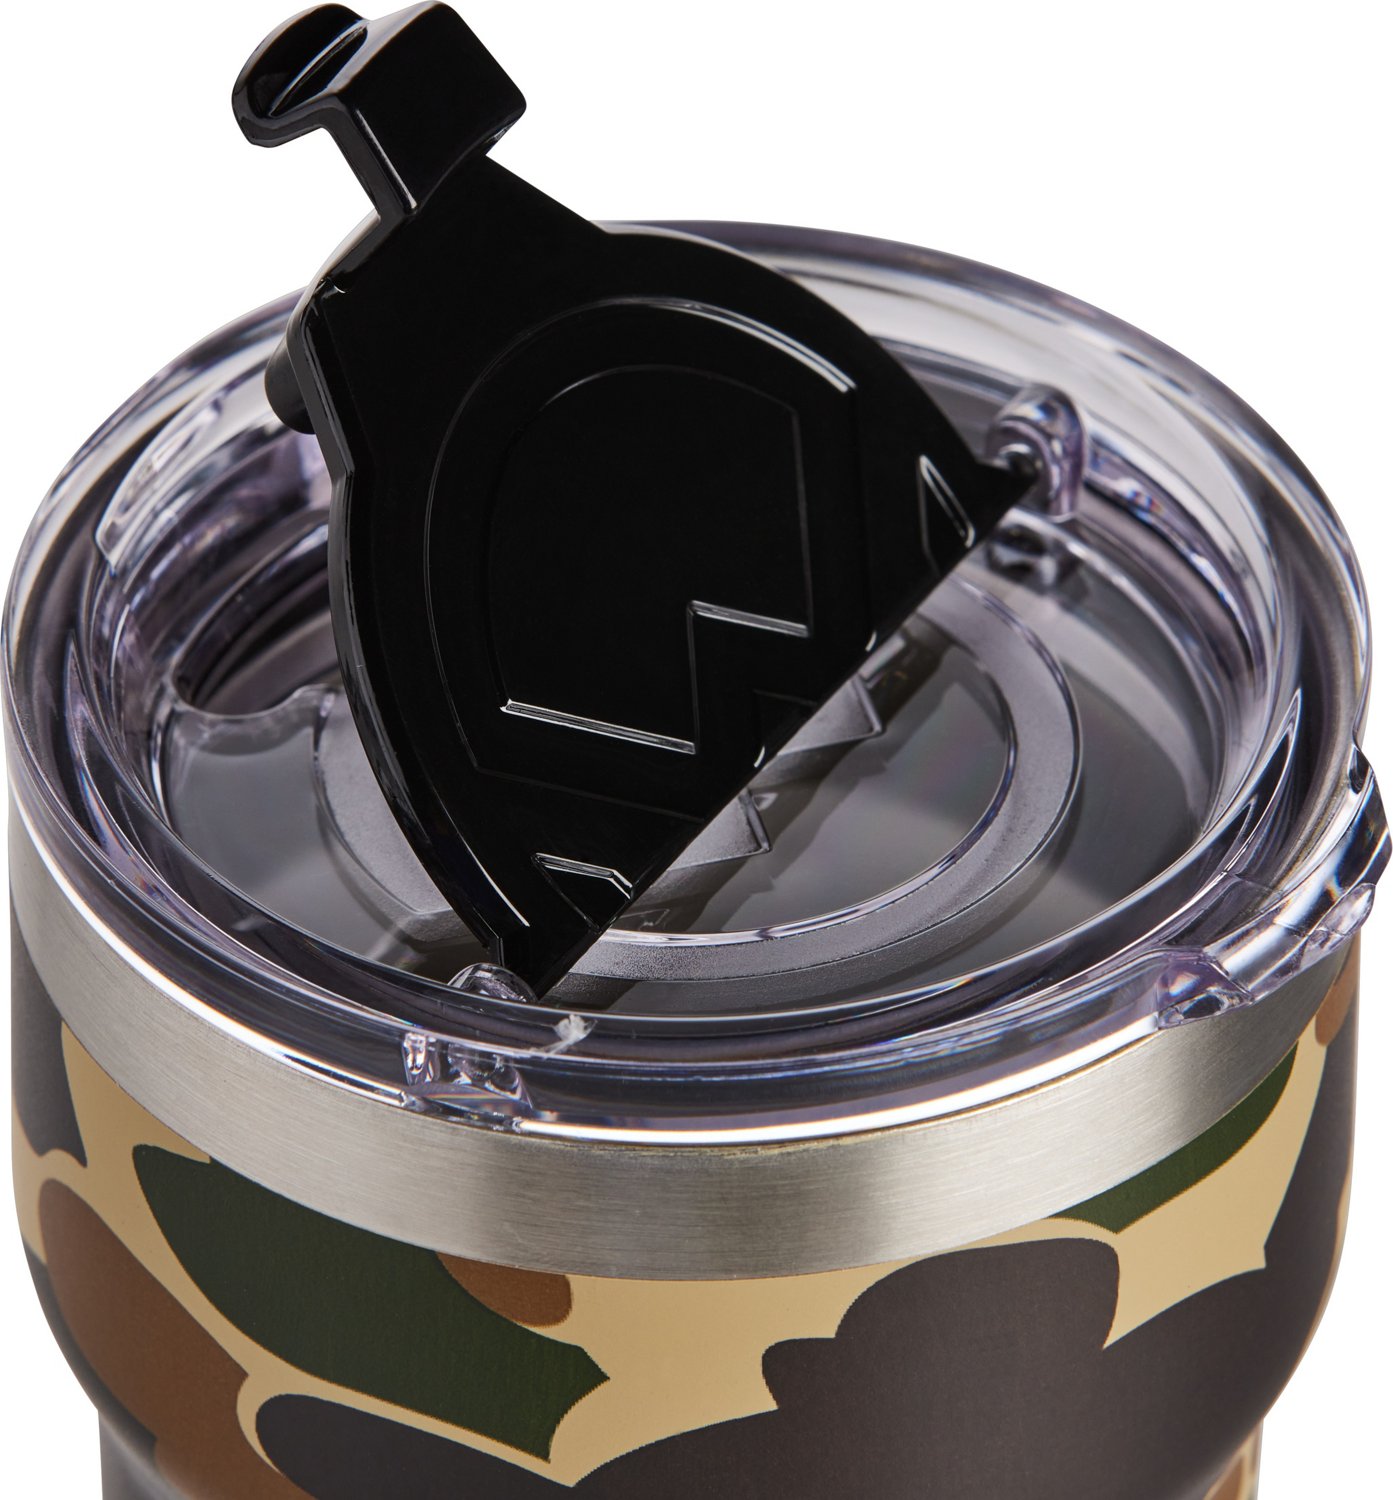 Magellan Outdoors Throwback Camouflage 30 oz Tumbler with Lid